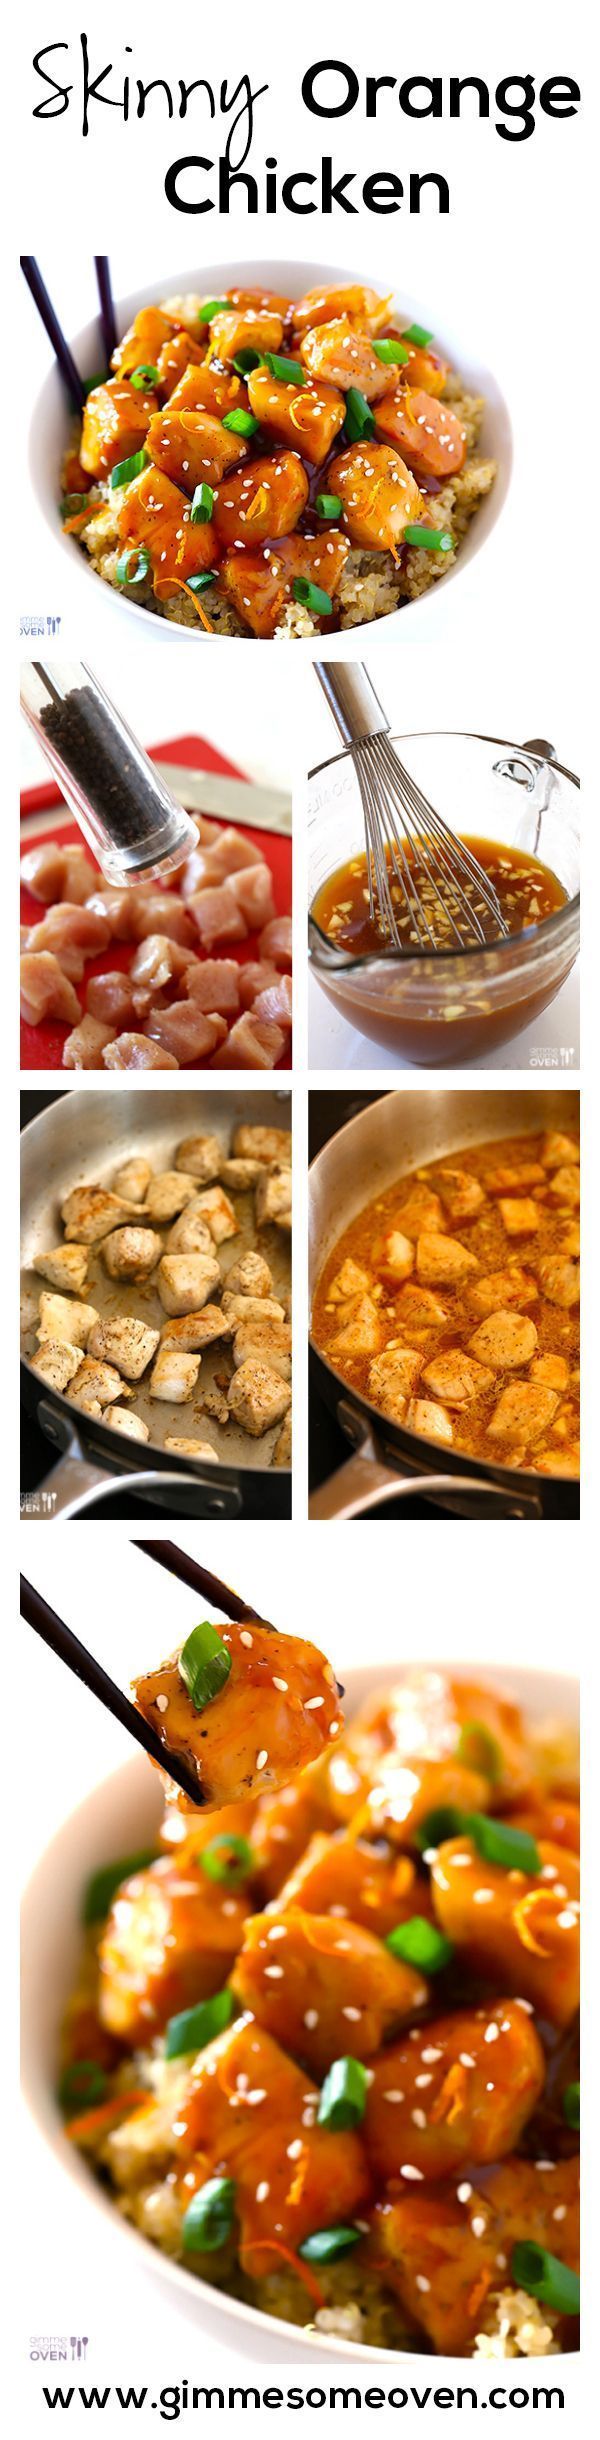 SKINNY Orange Chicken Recipe — All of the flavor you love, without all of the calories.